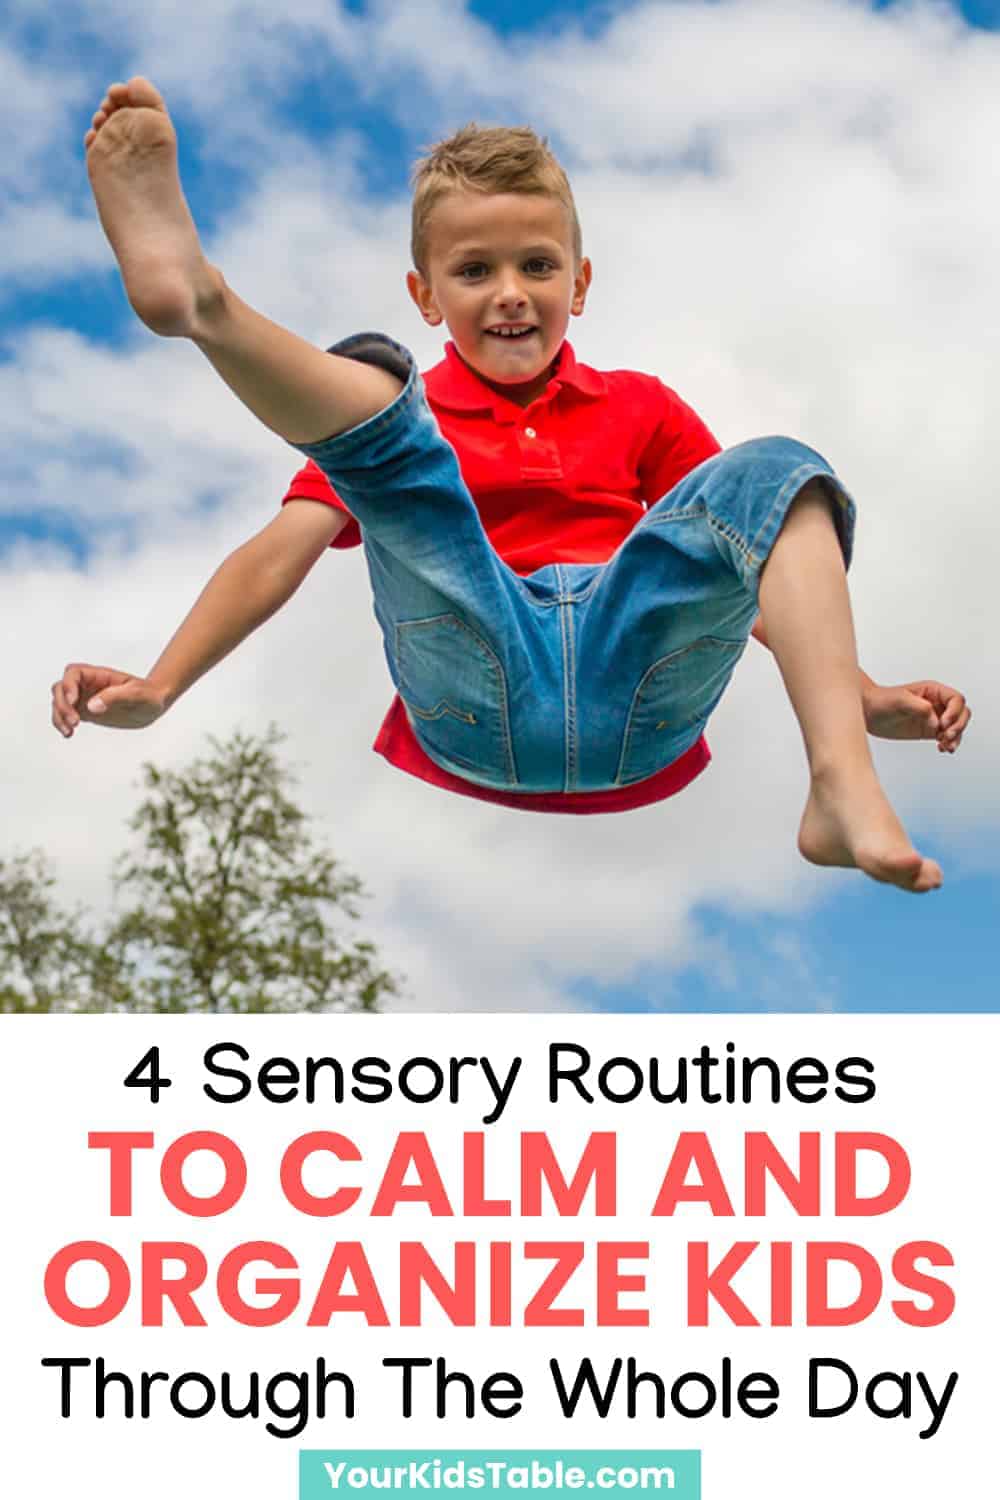 Check out these 4 easy-as-pie sensory routines that leverage simple sensory diet activities to calm, focus, and organize kids from morning to bedtime. 